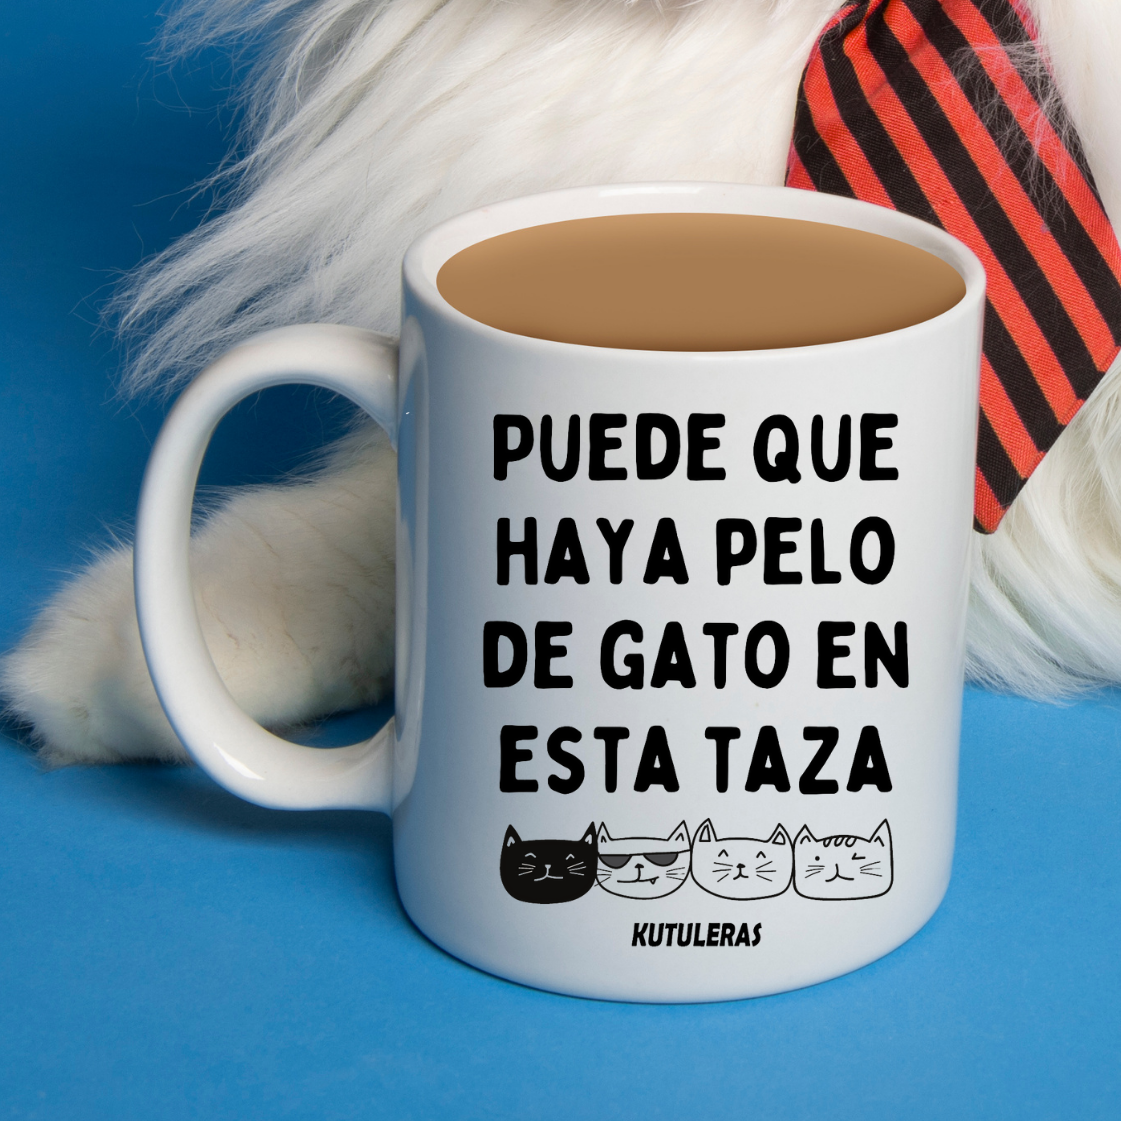 Taza "There might be cat hair in this mug"